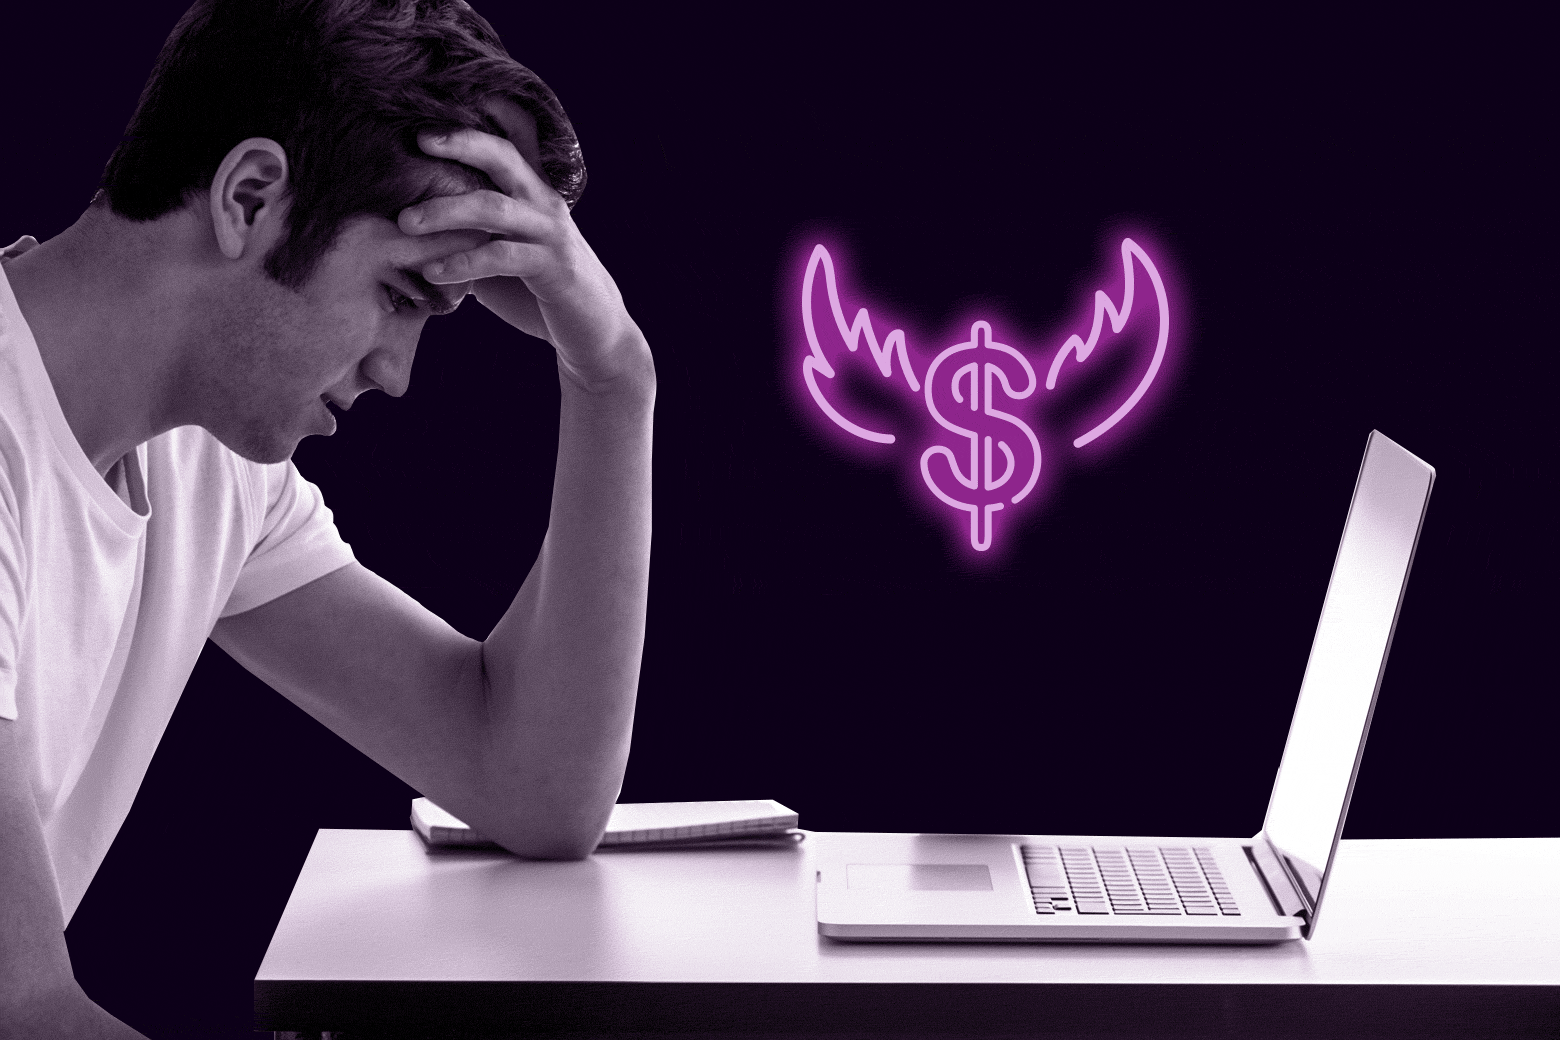 Worried male college student in front of laptop next to a neon dollar sign with wings.